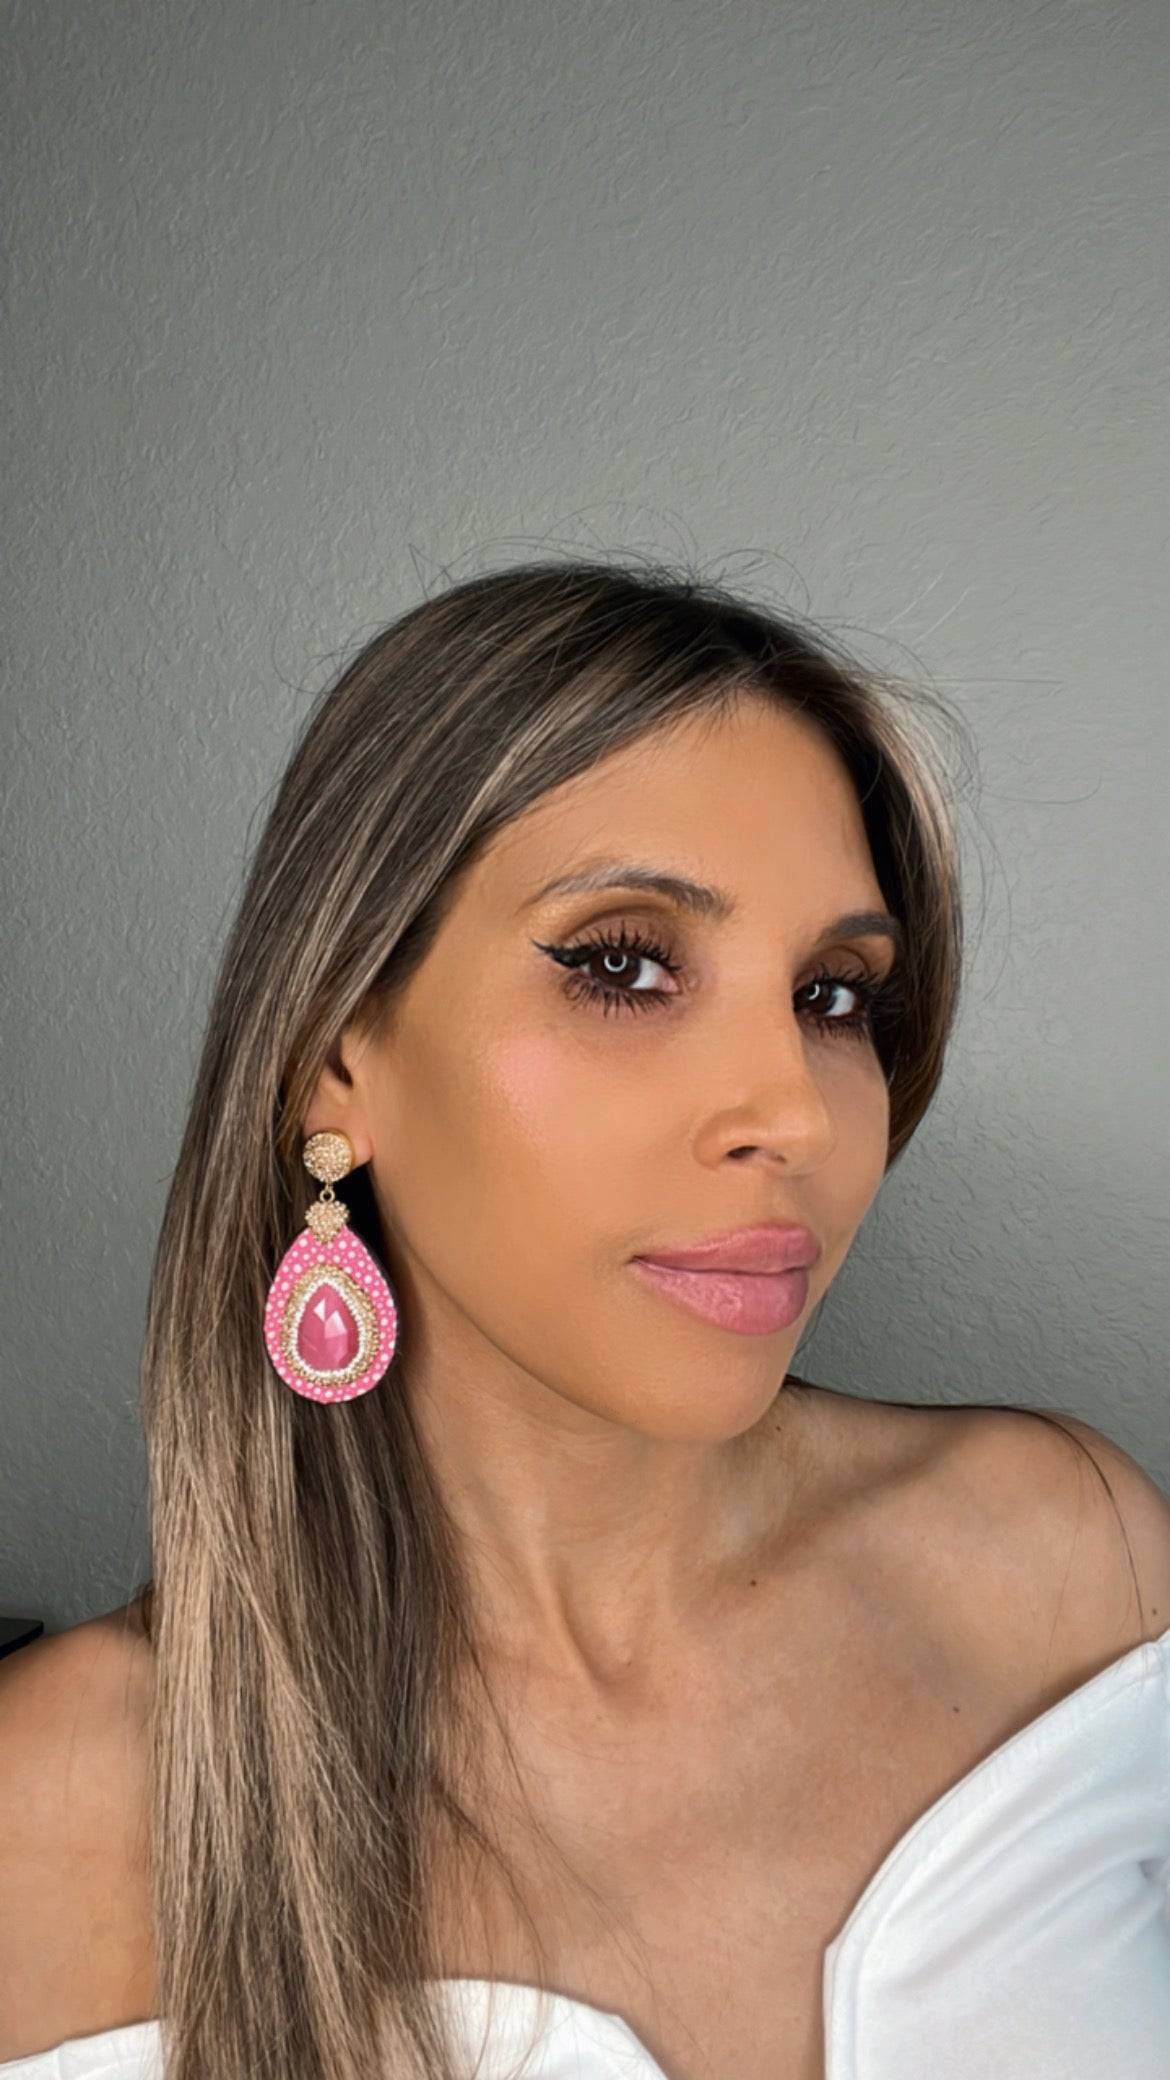 Pink Leopard Leather Teardrop and Crystal Earring - Born To Glam